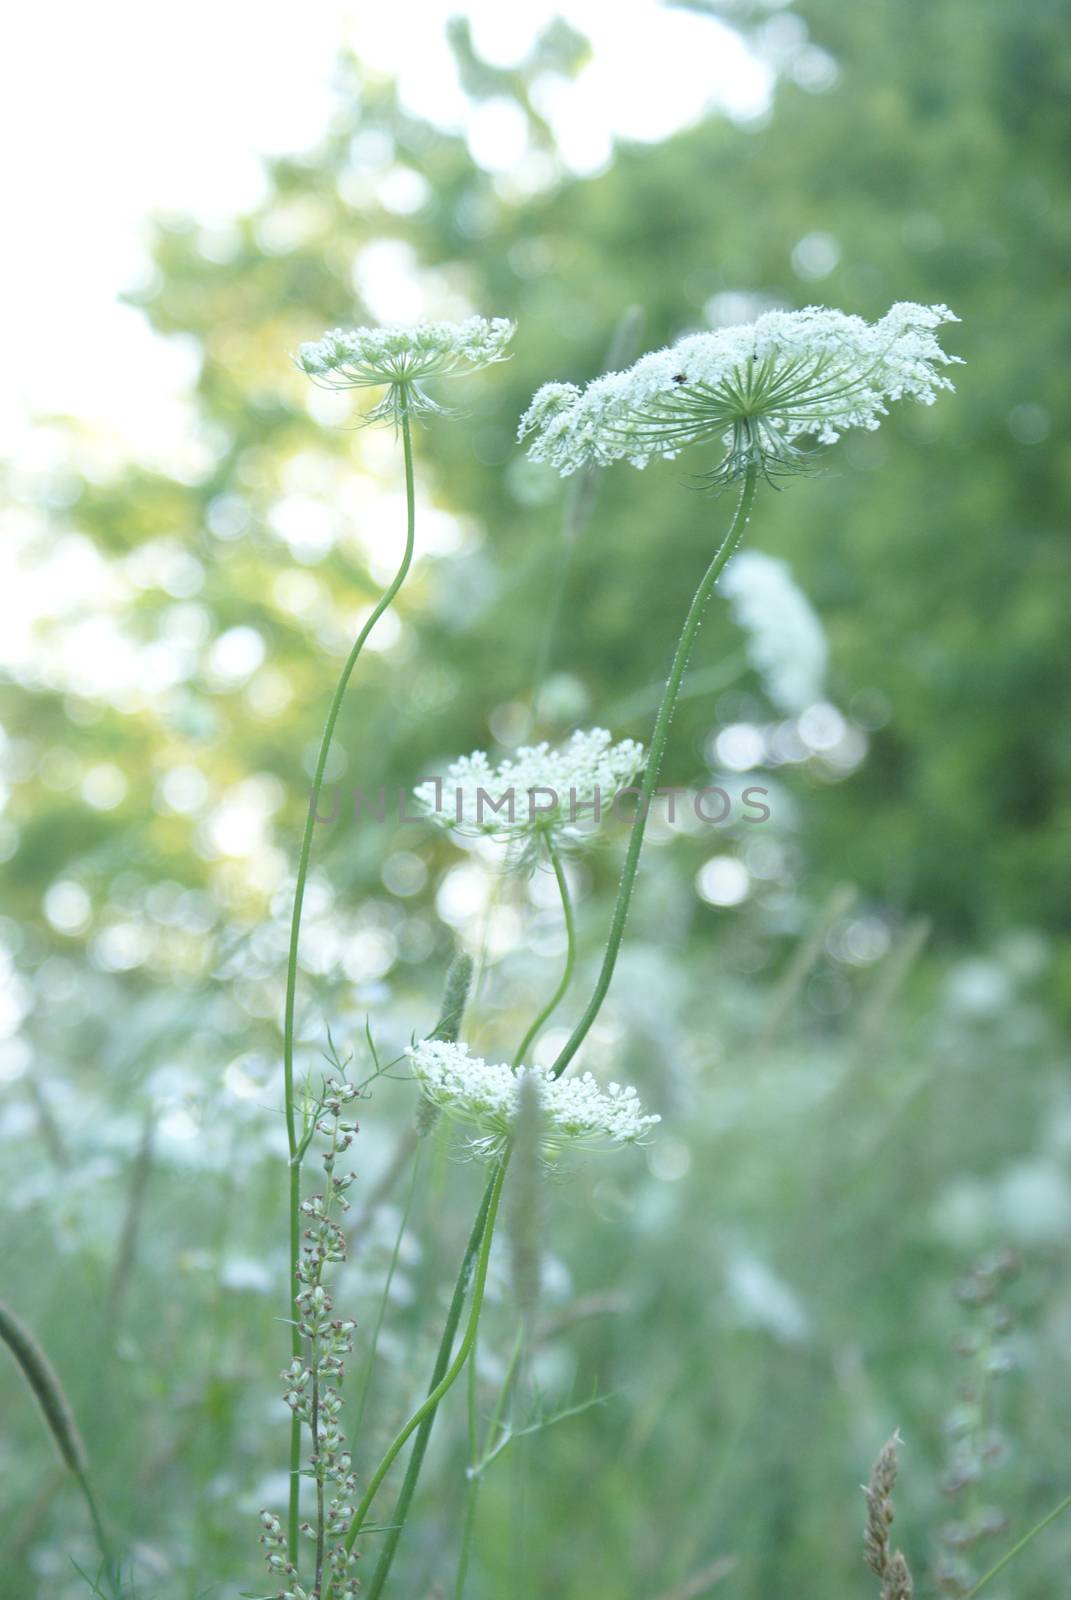 A single image of a set of images capturing the abunadant beauty of the graceful Queen Anne Lace Flowers in full summer bloom located in Eastern Ontario, Canada.